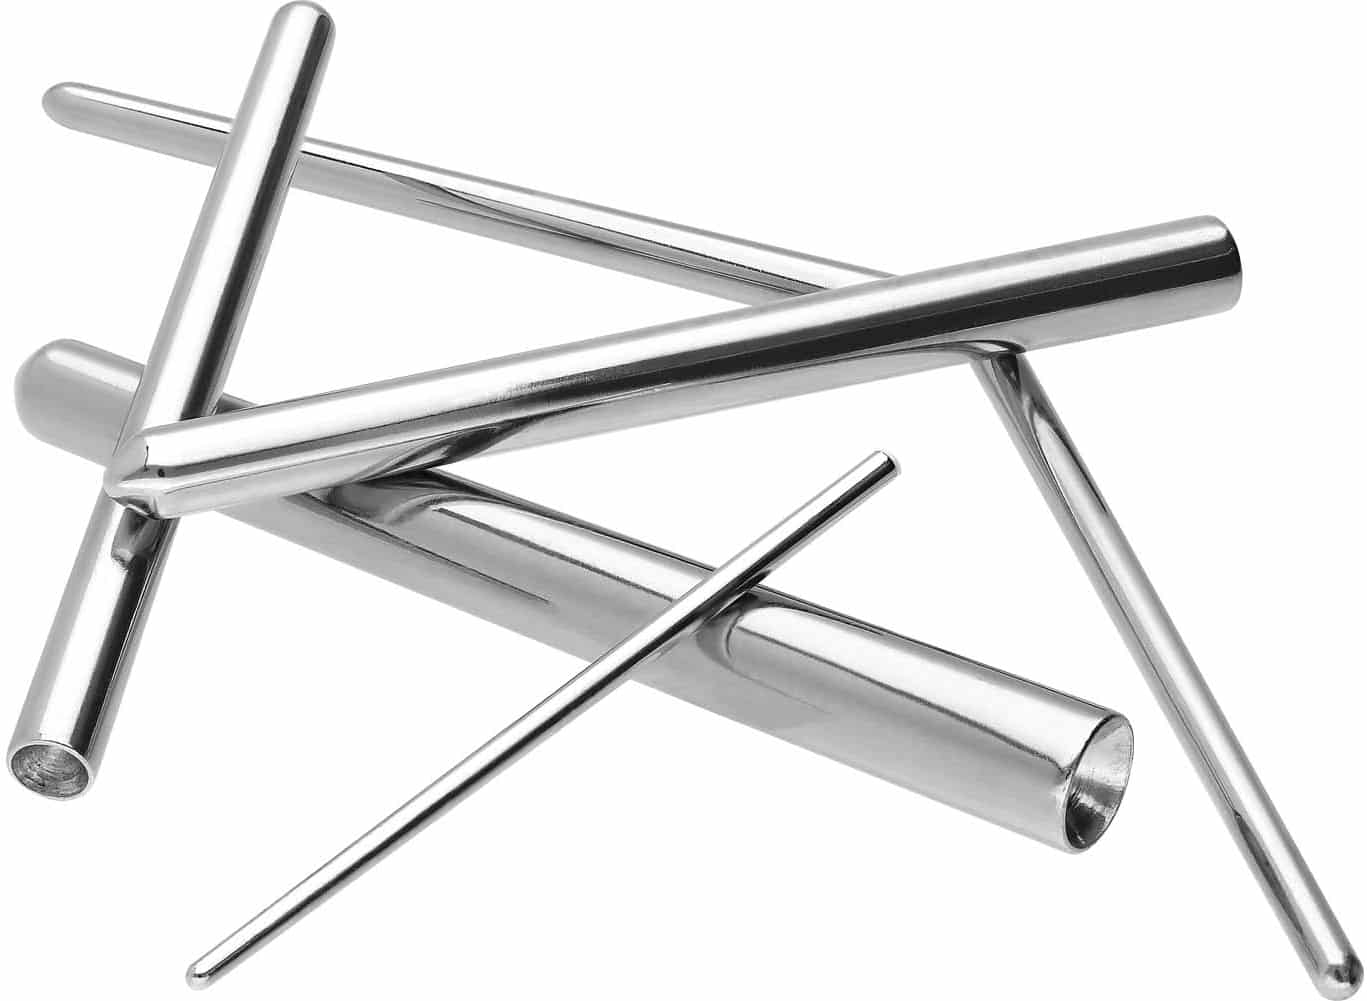 Surgical steel jewelry guide pin